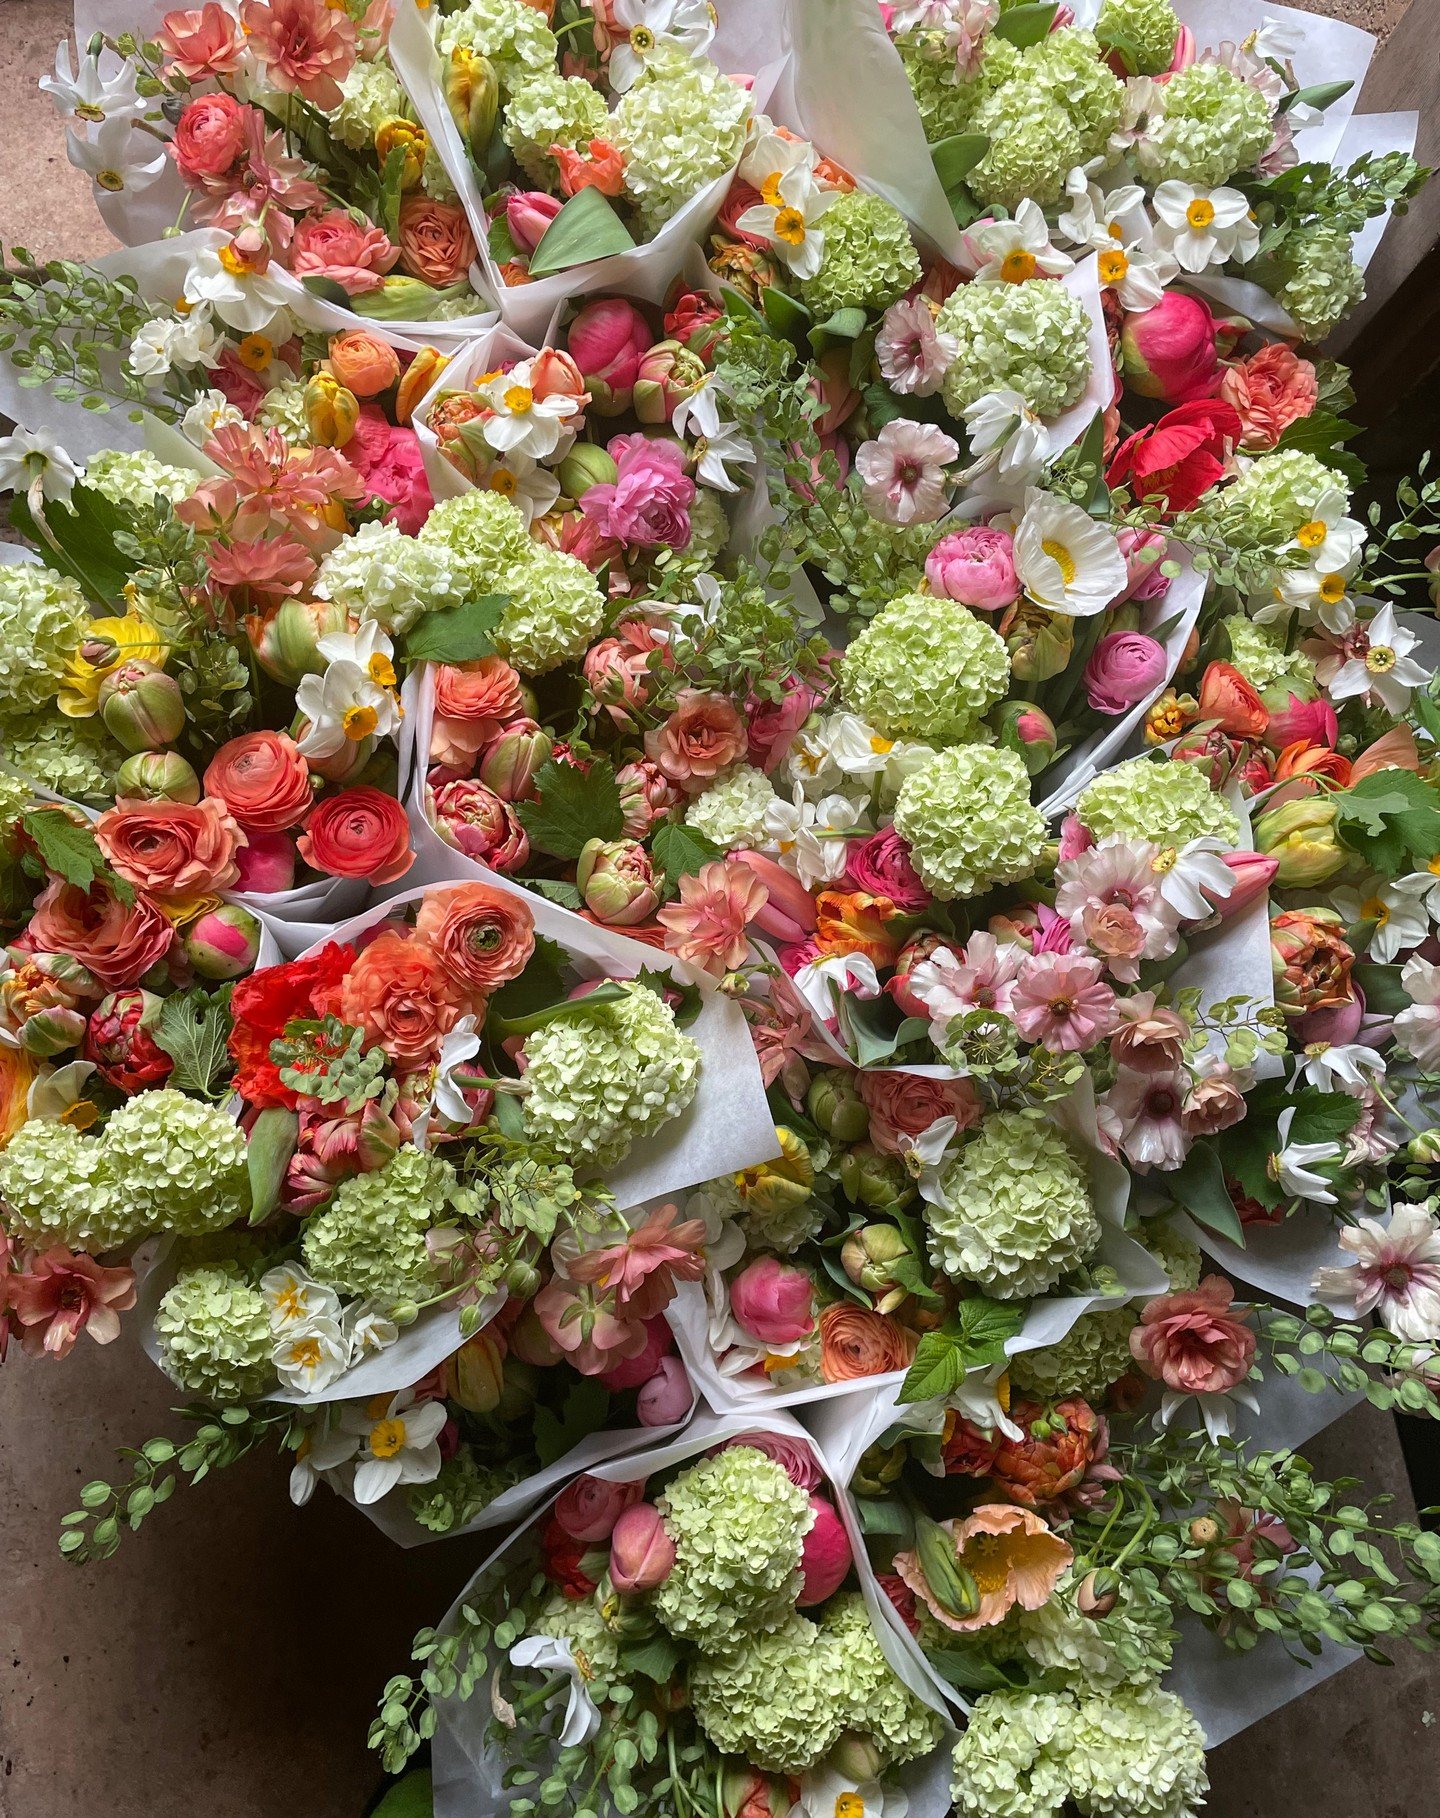 Mother's Day premium bouquets still available for pre-order. 100% farm grown! Lots of colors to choose from. There will be some extras available for walk-ups at Chestnut Hill, but if you are local to Trappe and want one, pre-order is a must. There wi